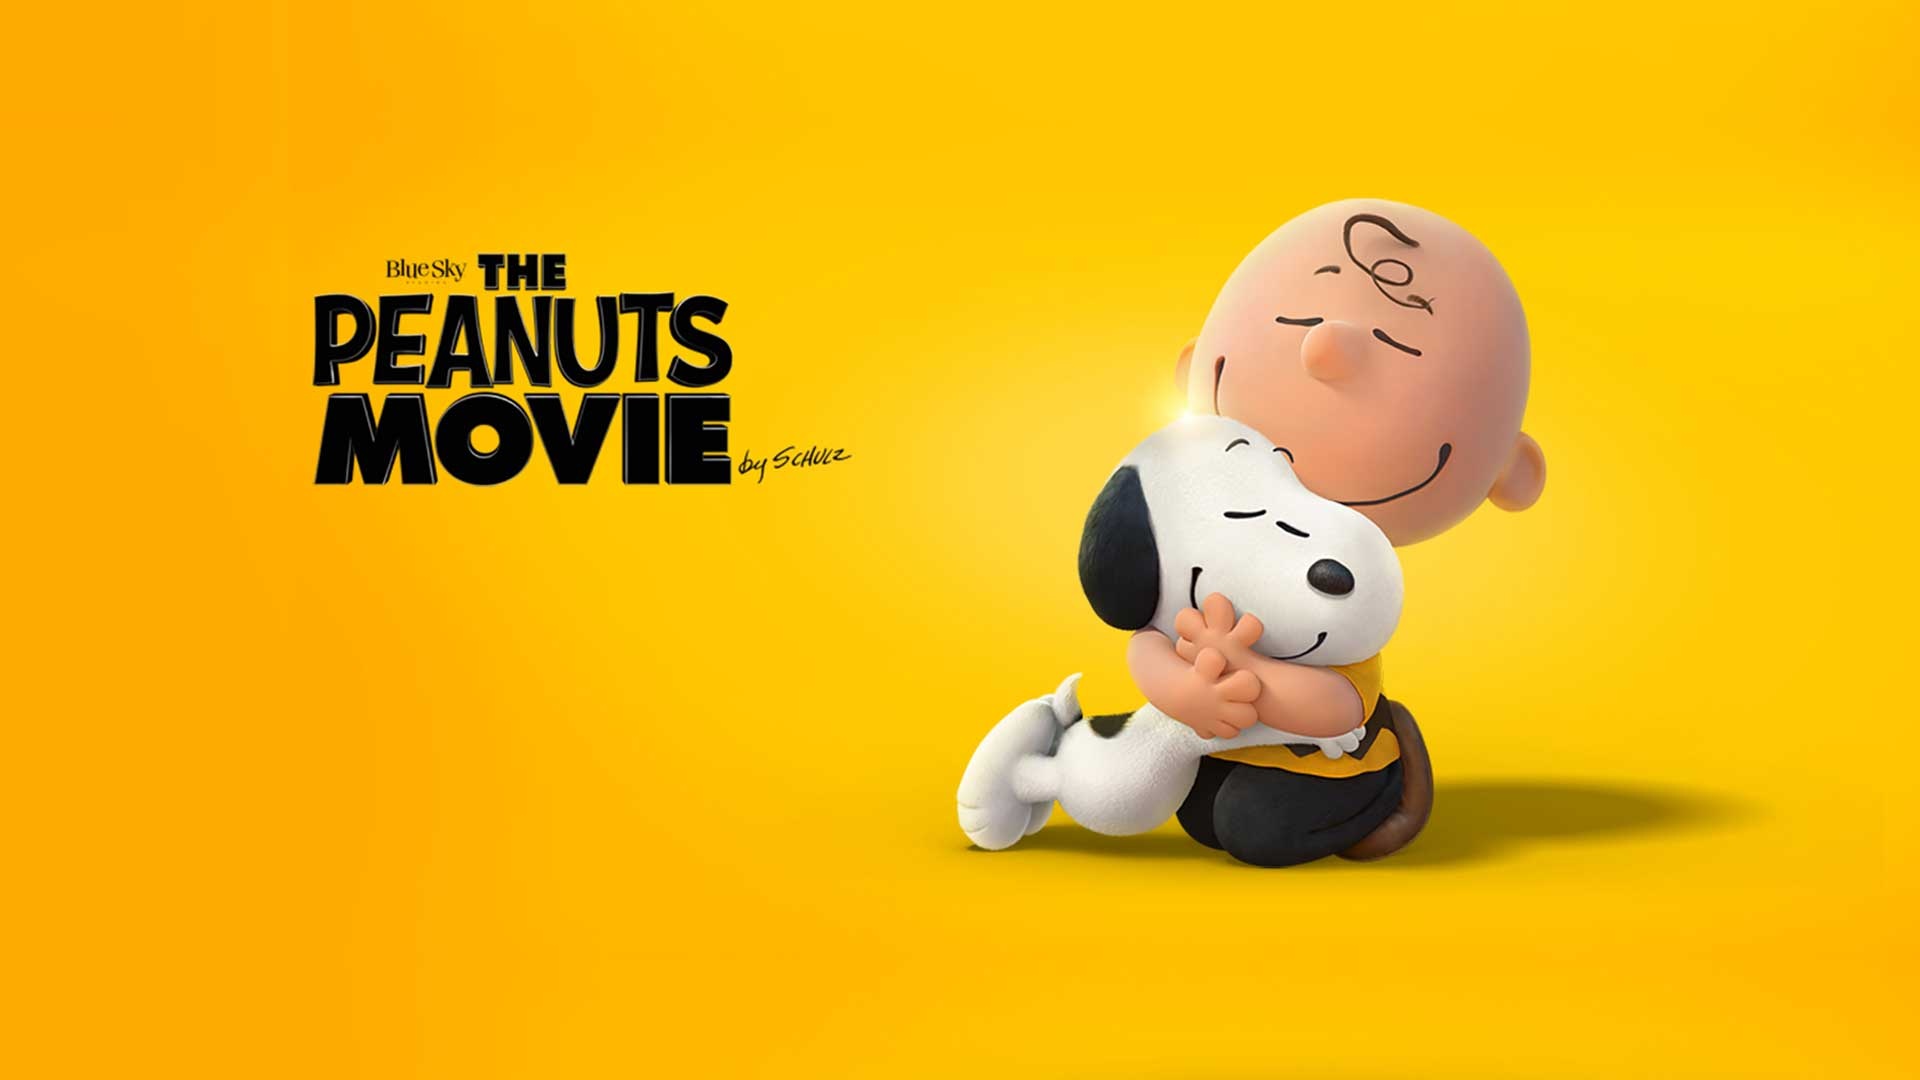 The Peanuts Movie, Reformed perspective, Animated film, 1920x1080 Full HD Desktop